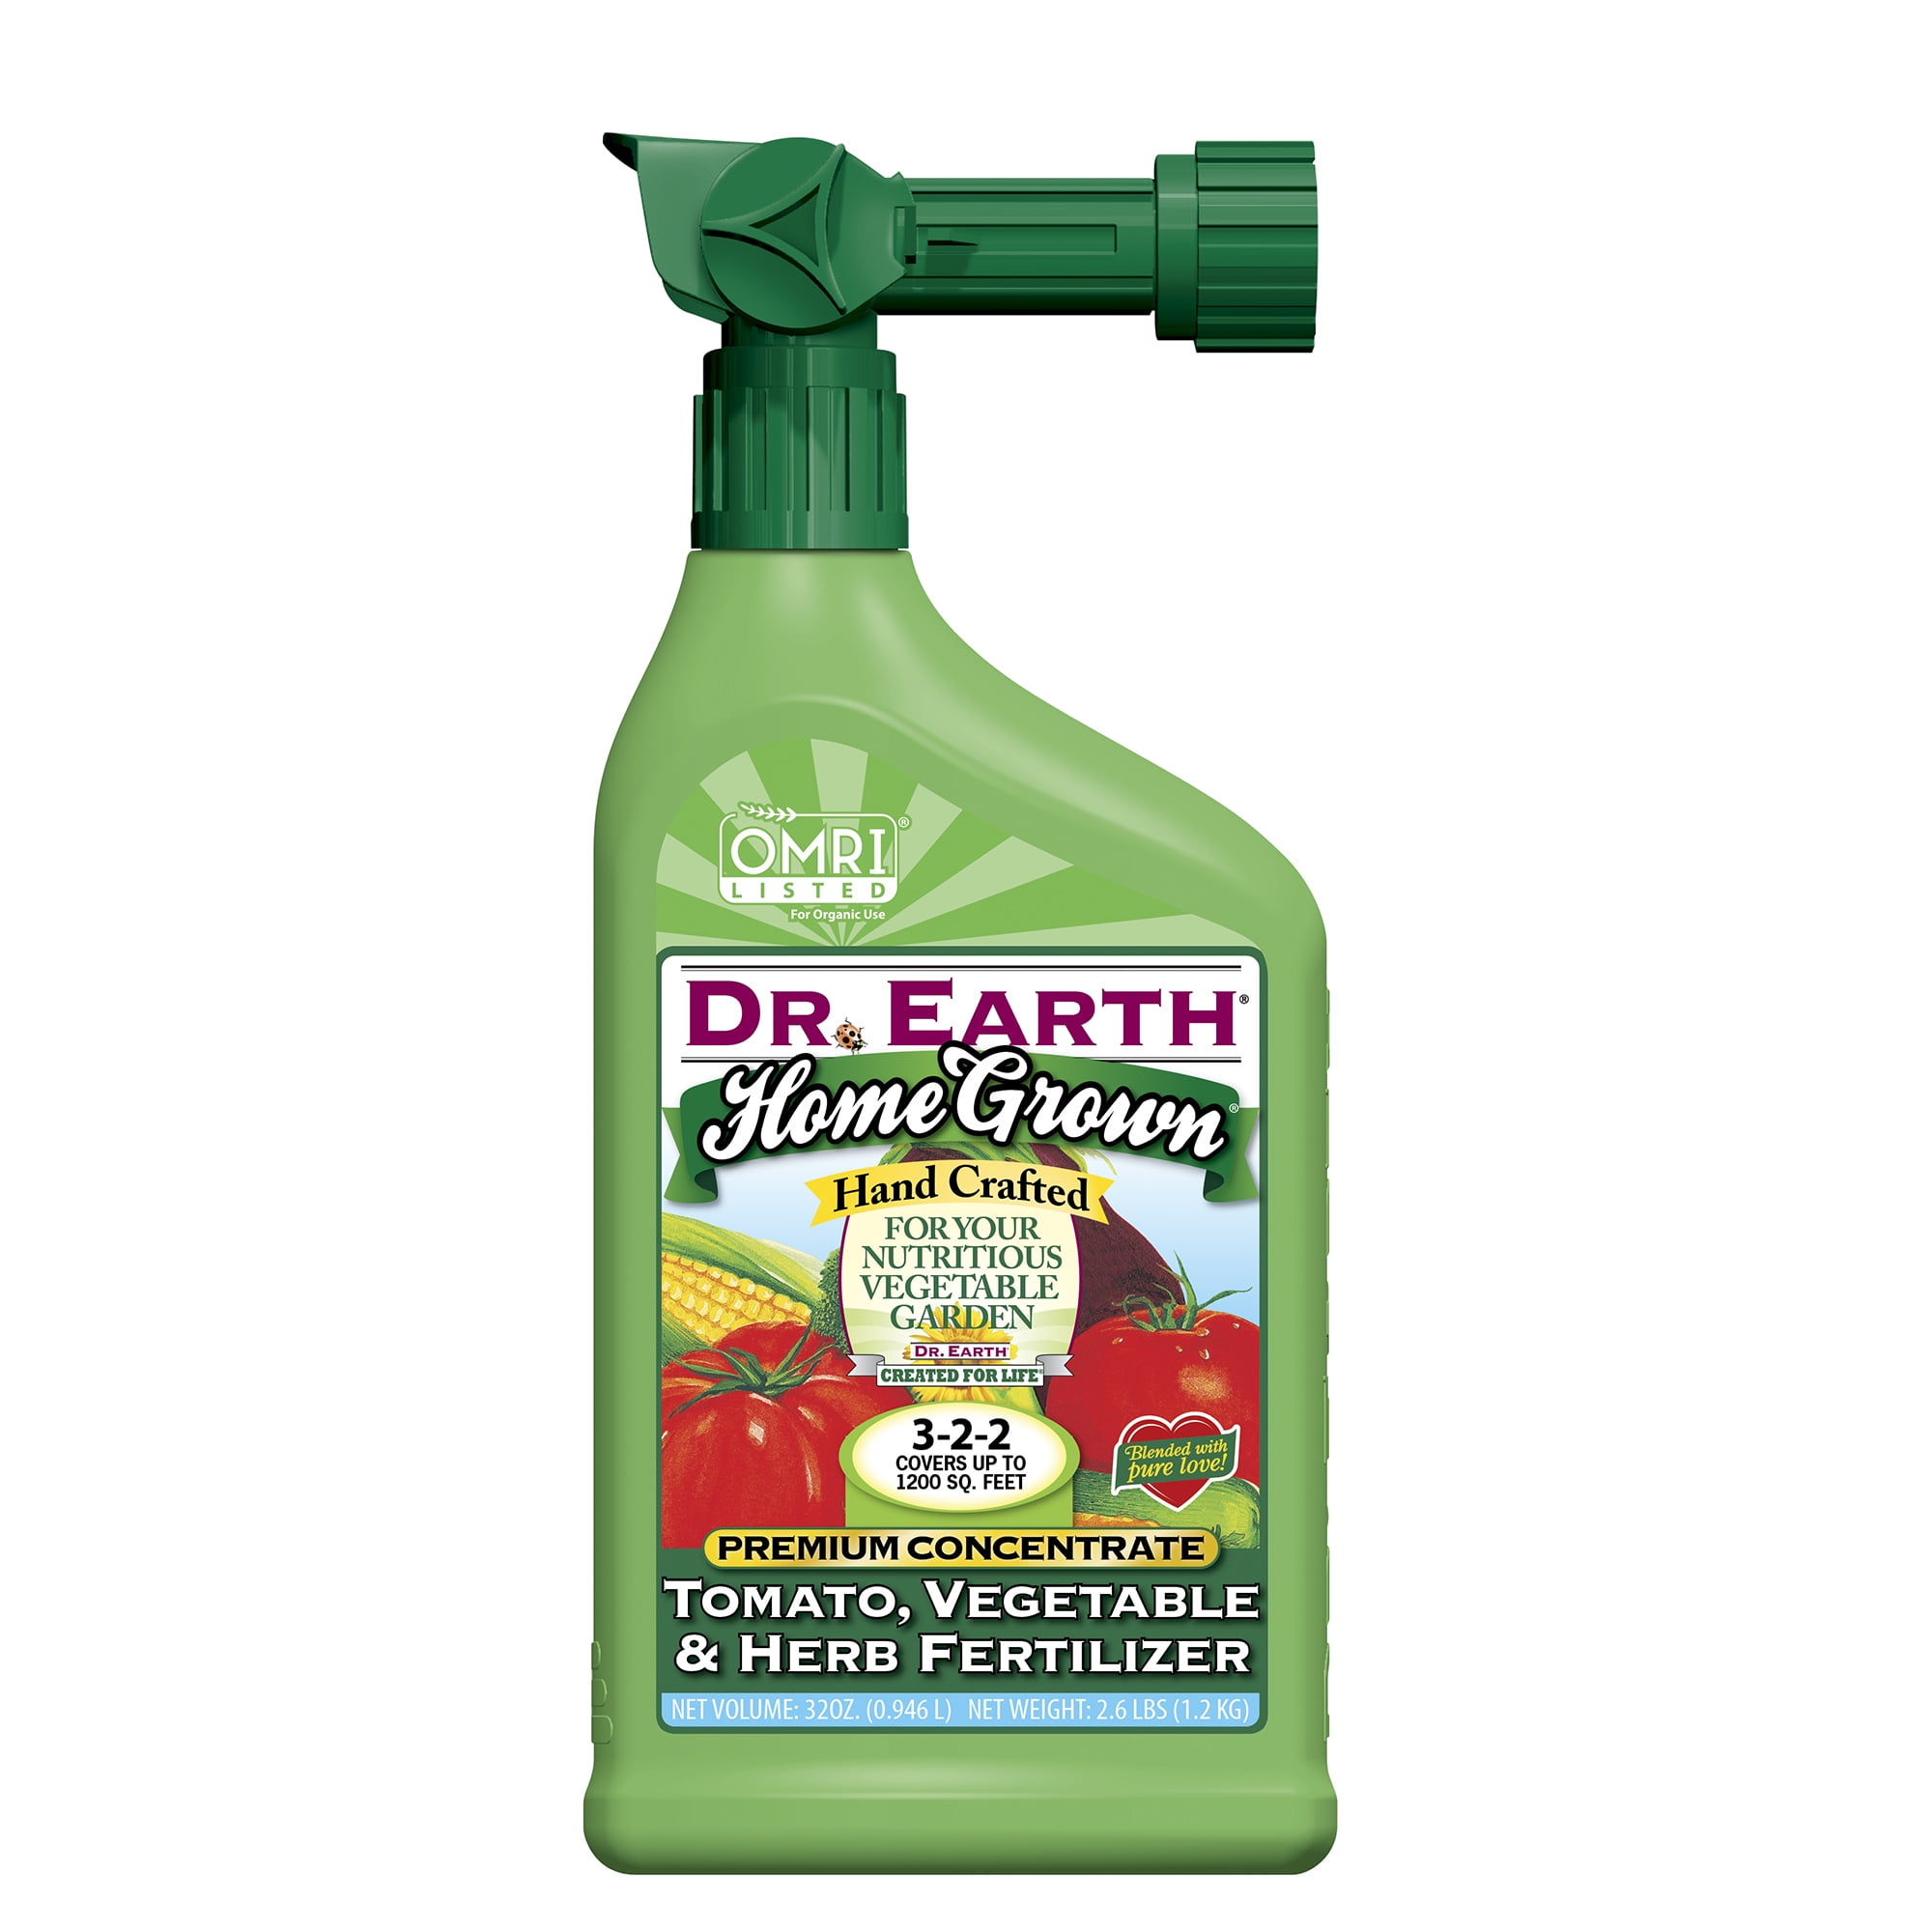 Dr. Earth Organic & Natural Home Grown Tomato, Vegetable & Herb